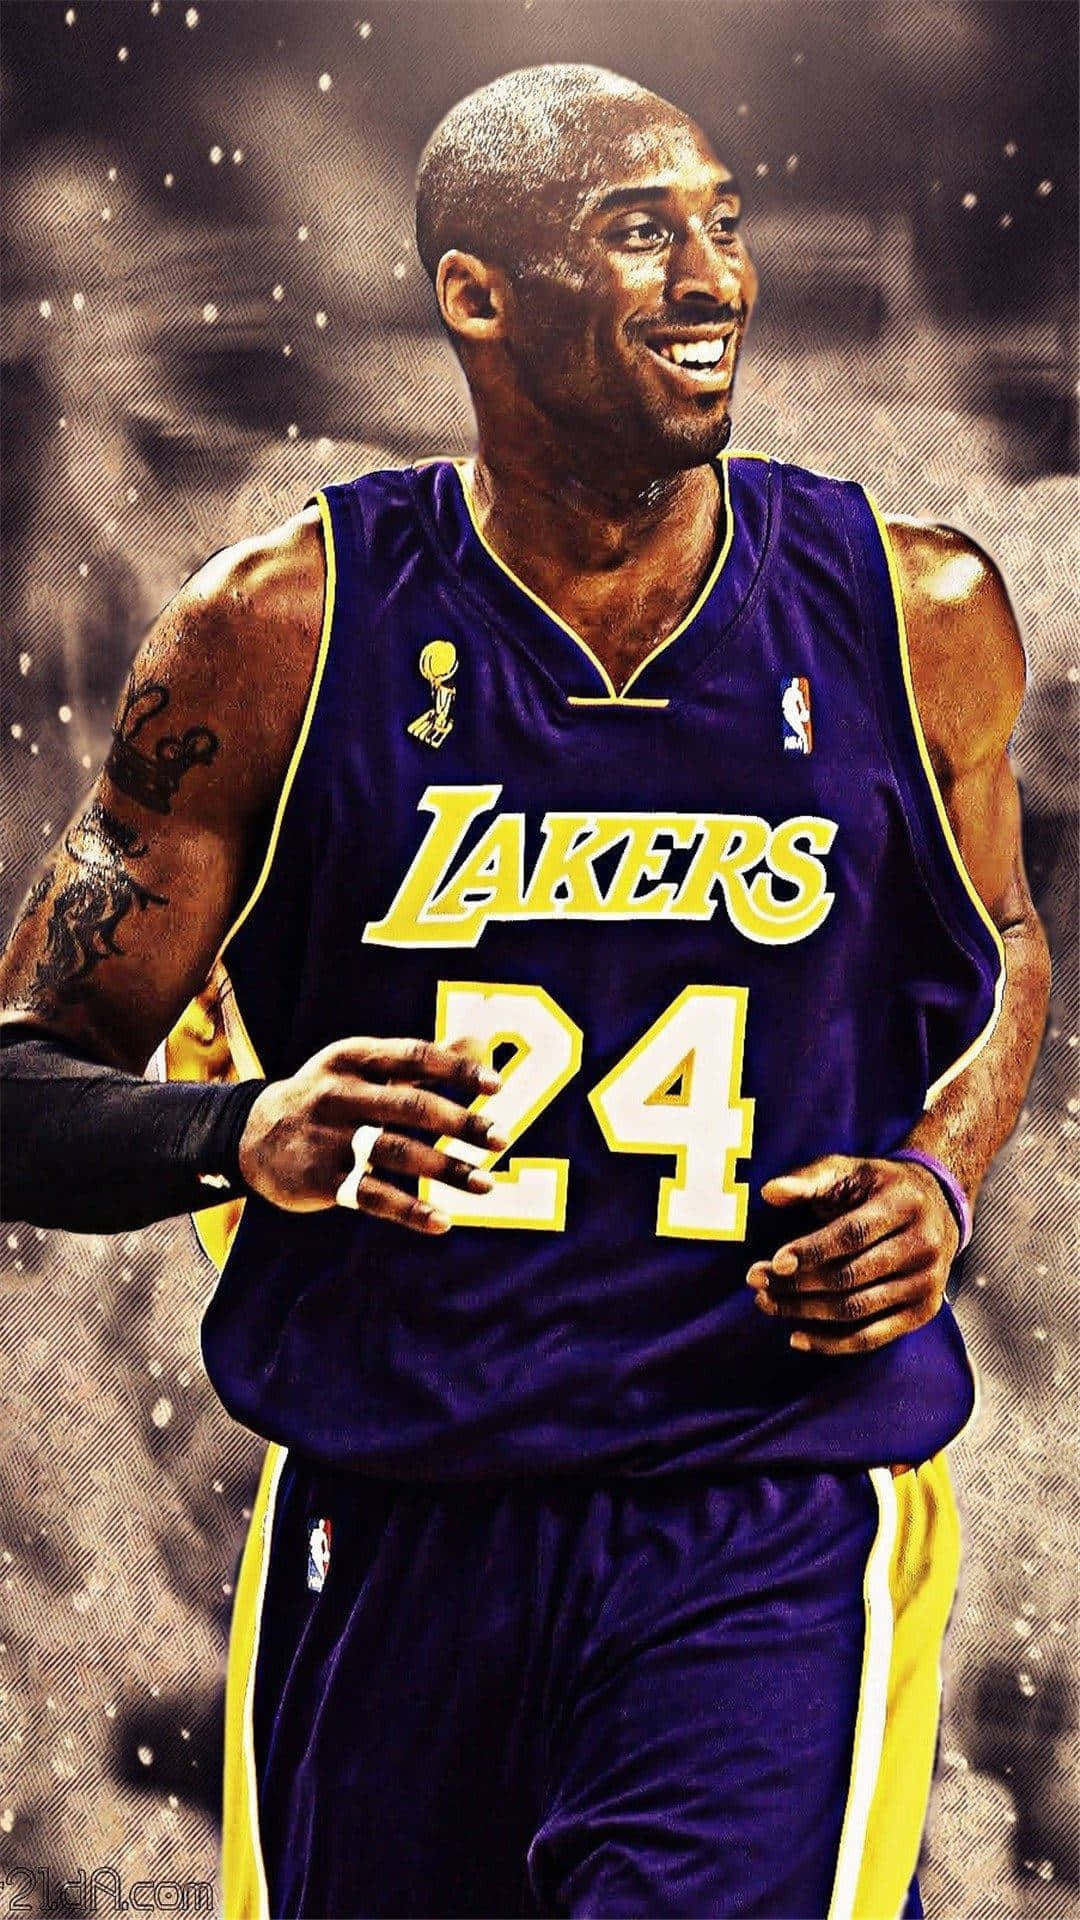 Kobe Bryant Gives His All On The Court Wallpaper